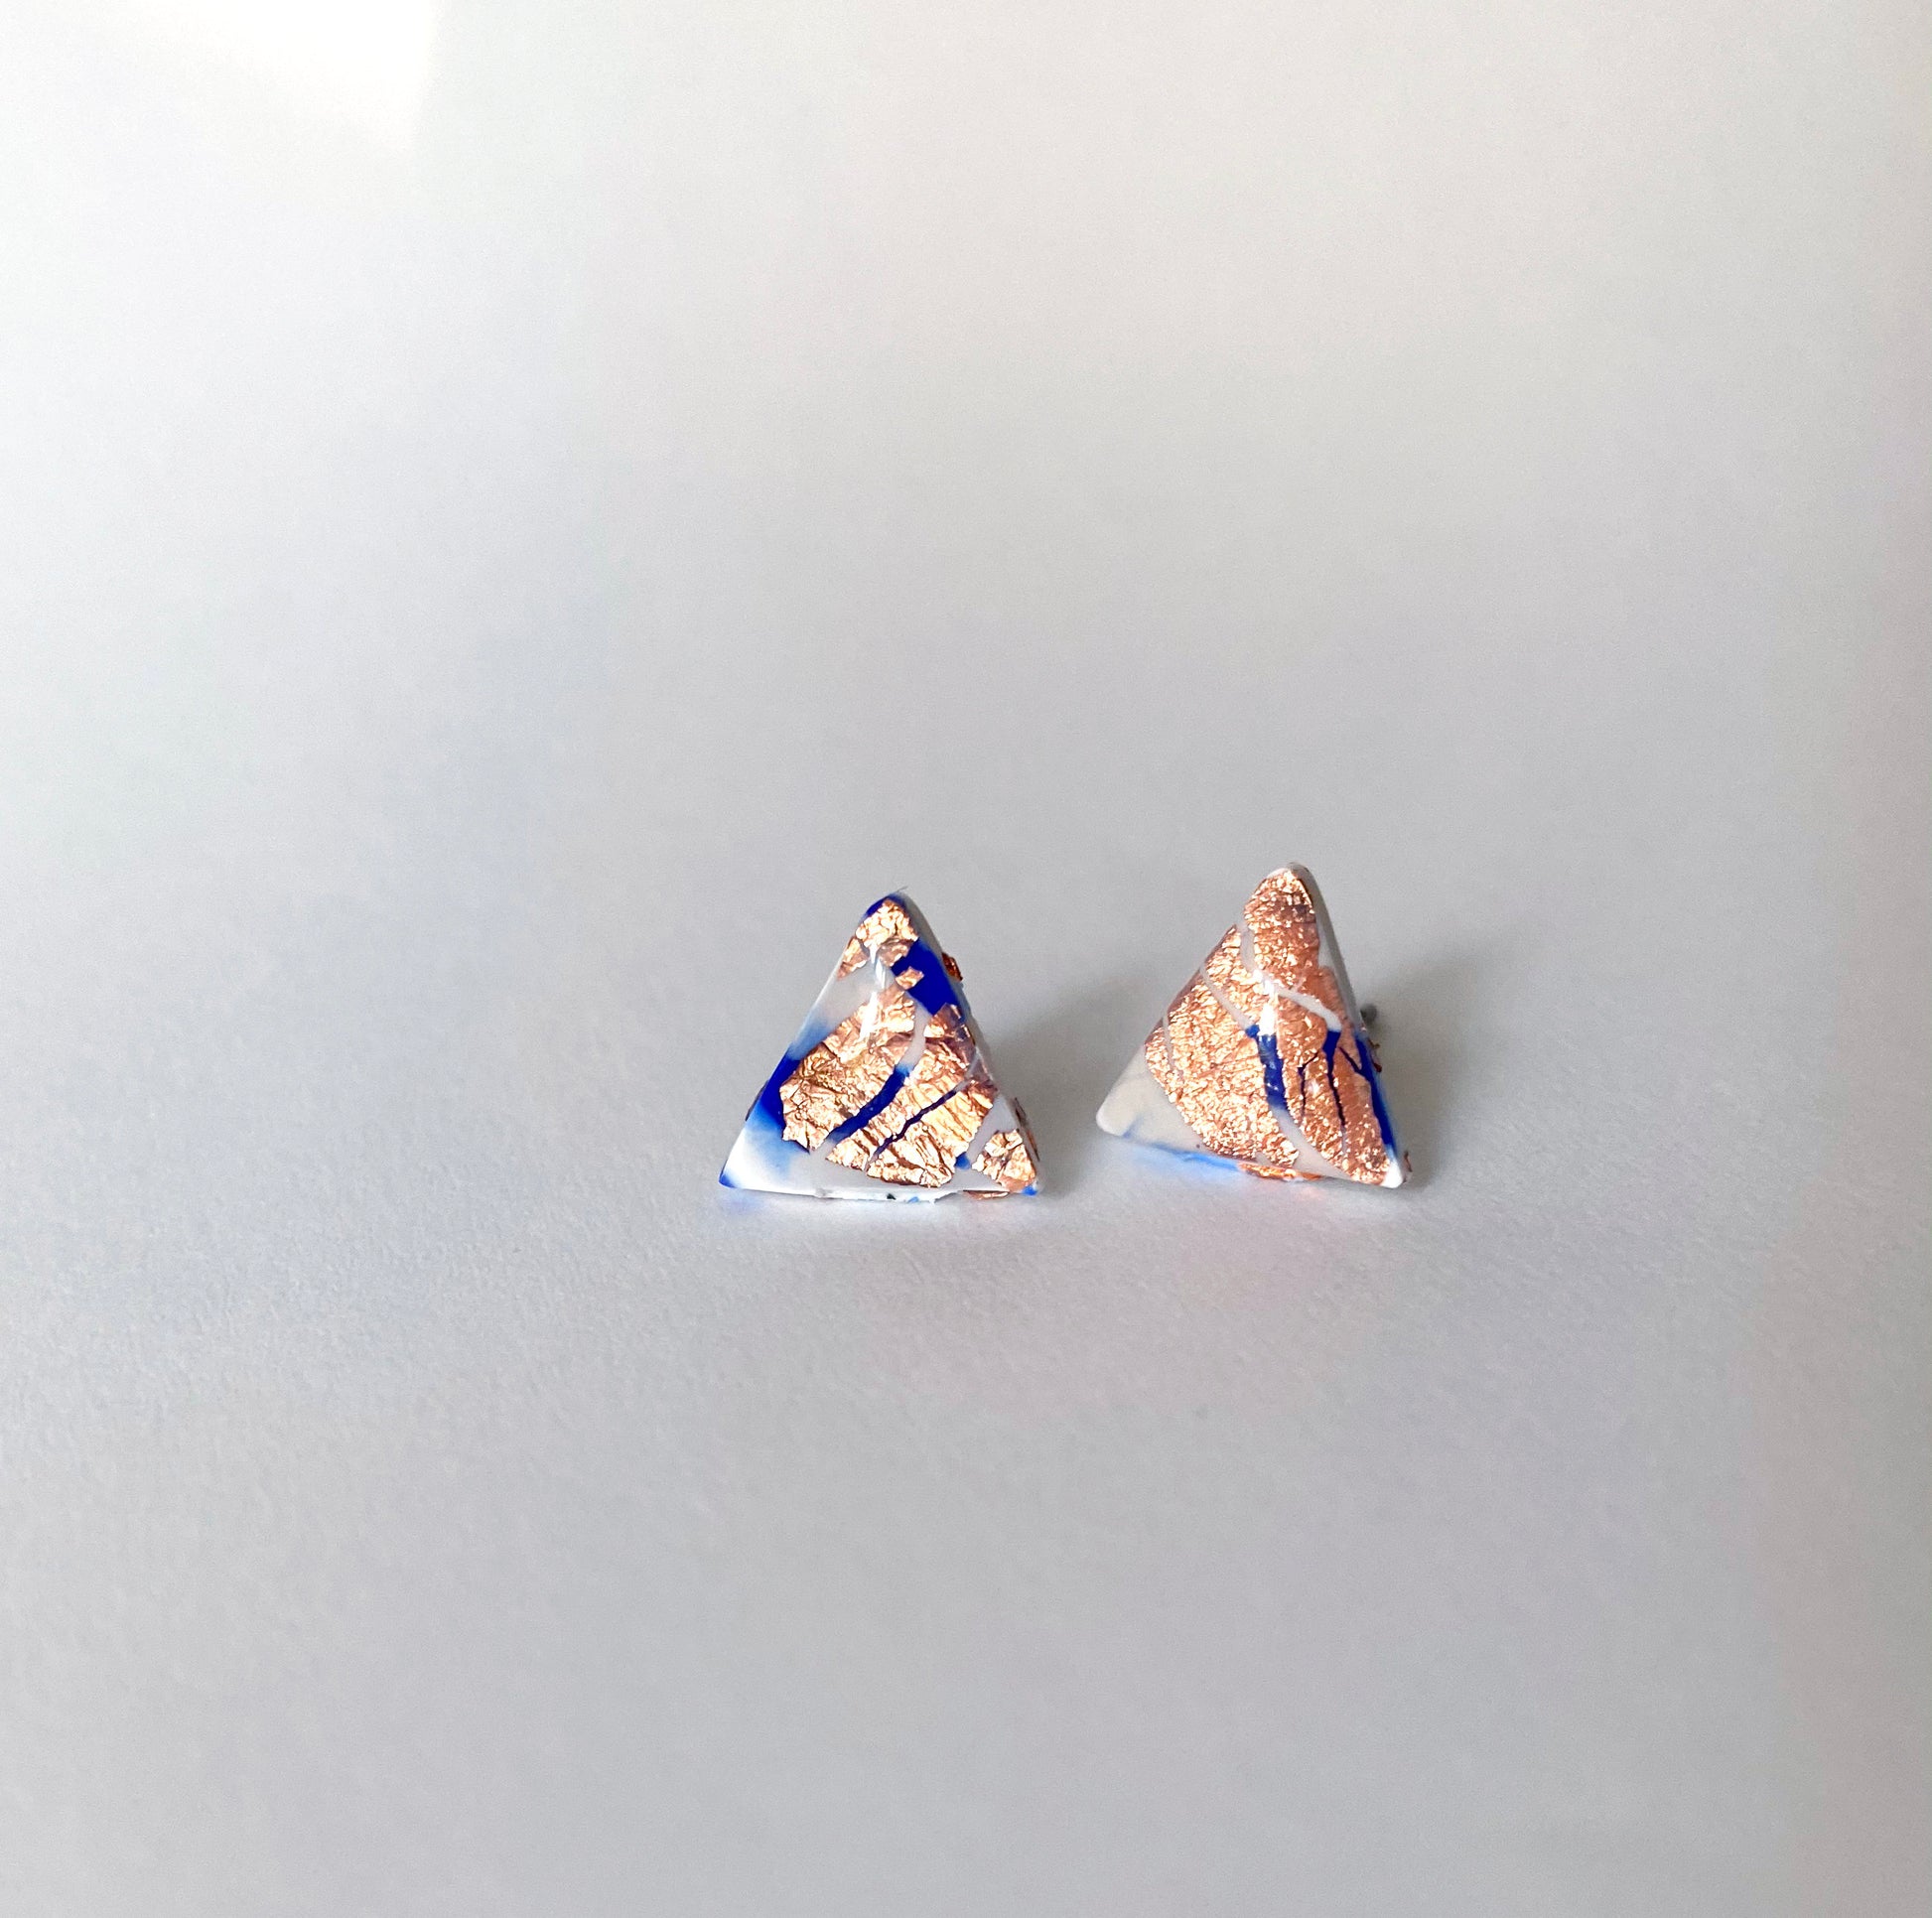 Marble triangle earrings with gold foil freeshipping - Ollijewelry